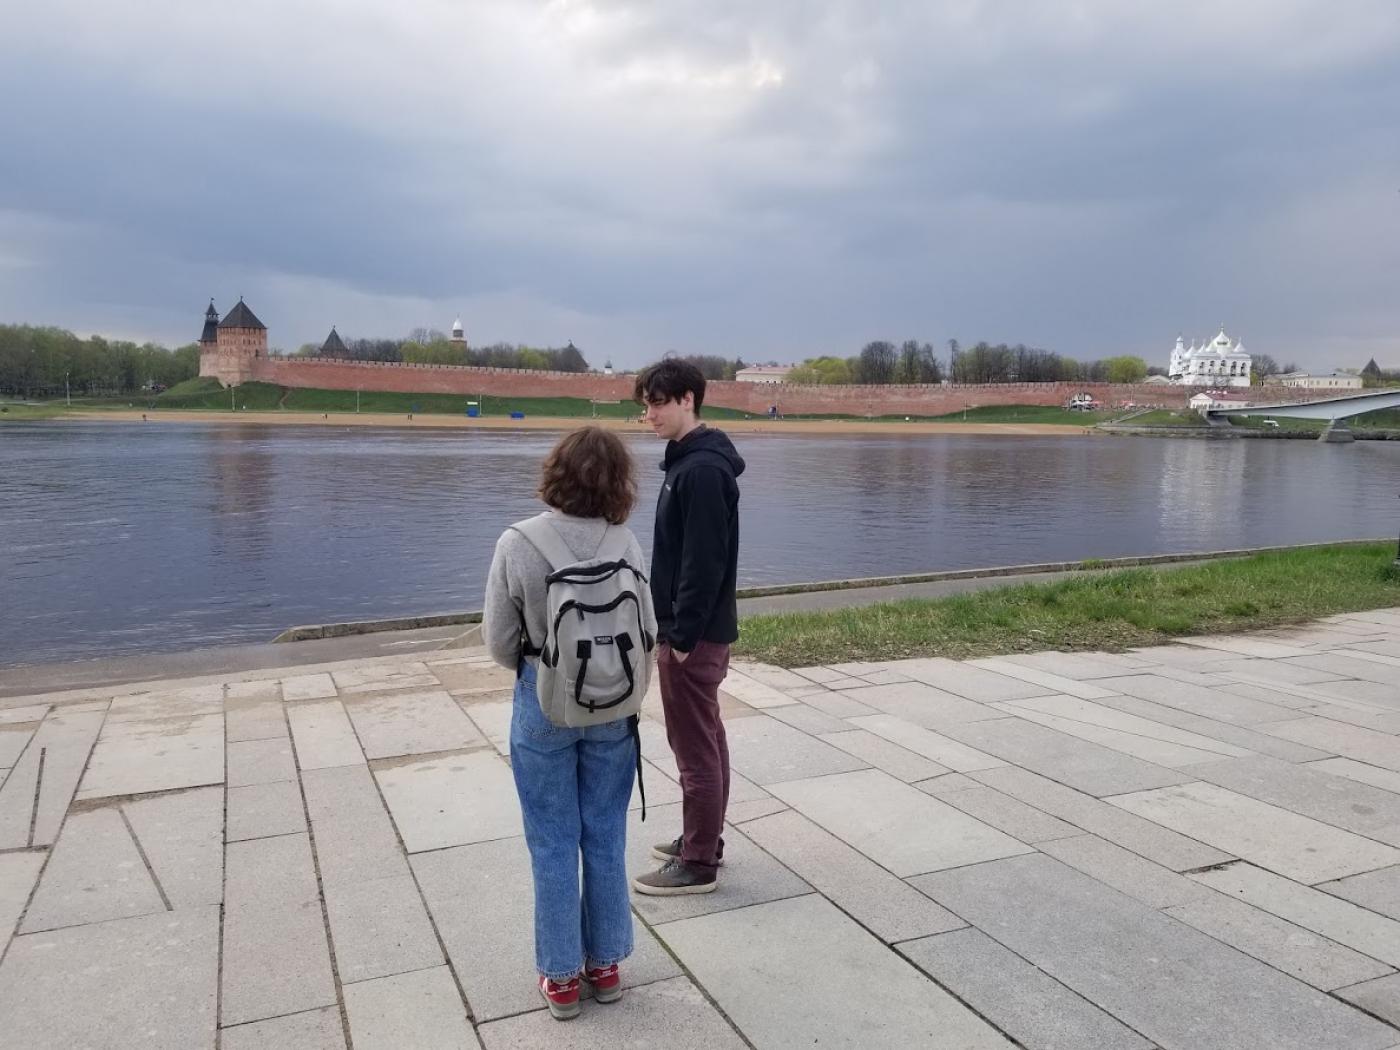 A Russian and American friend chatting on a recent trip to Novgorod.